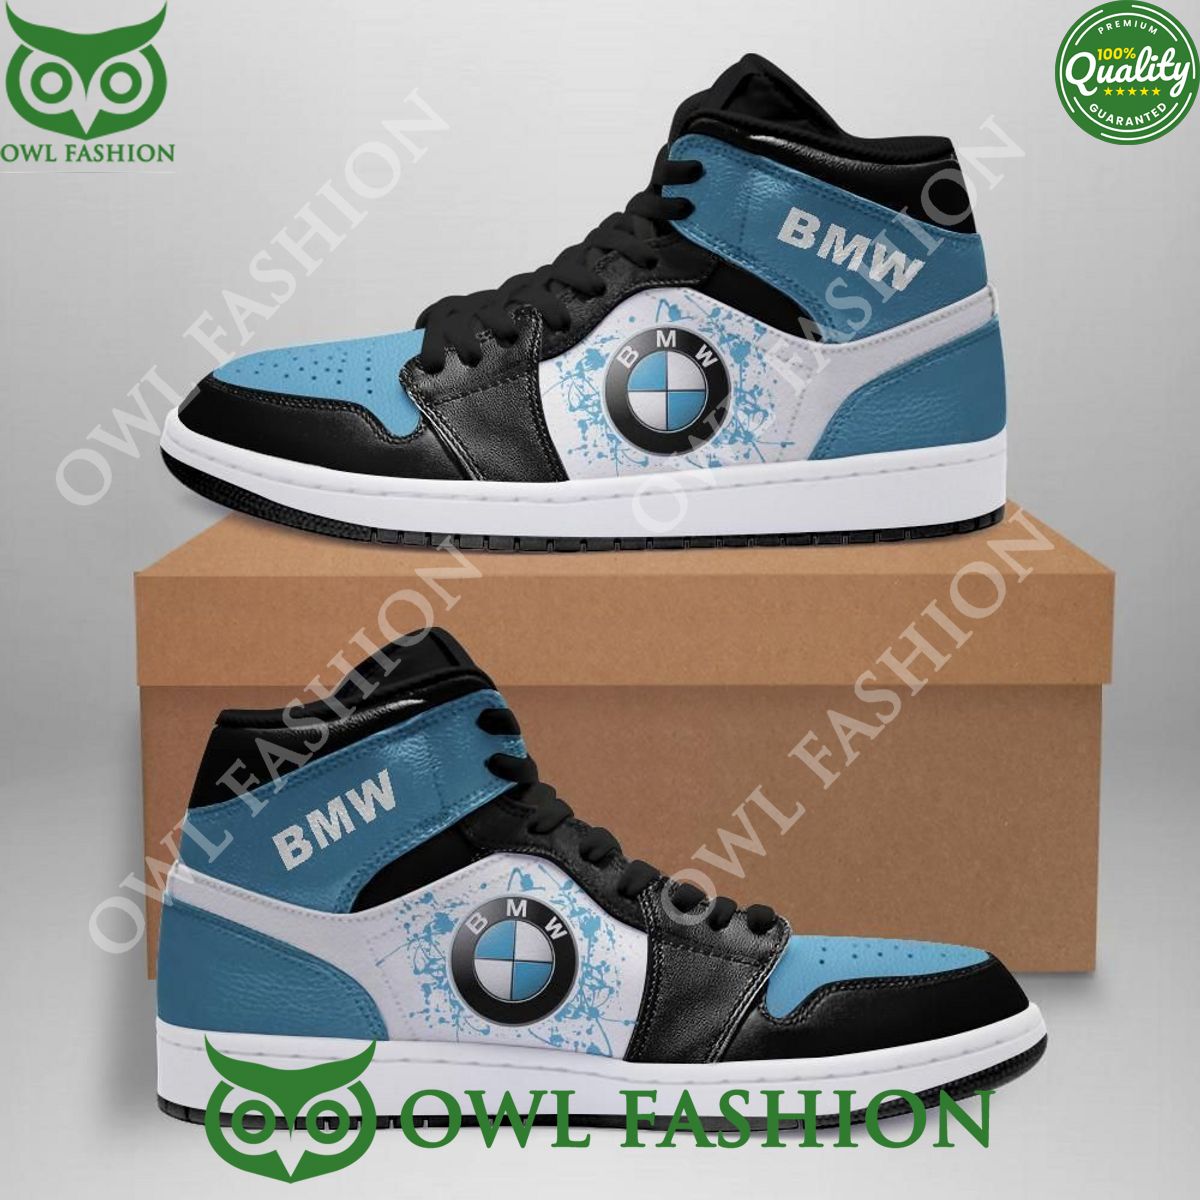 Bmw Luxury Automobile Car Air Jordan Sneakers Shoes Sport Natural and awesome